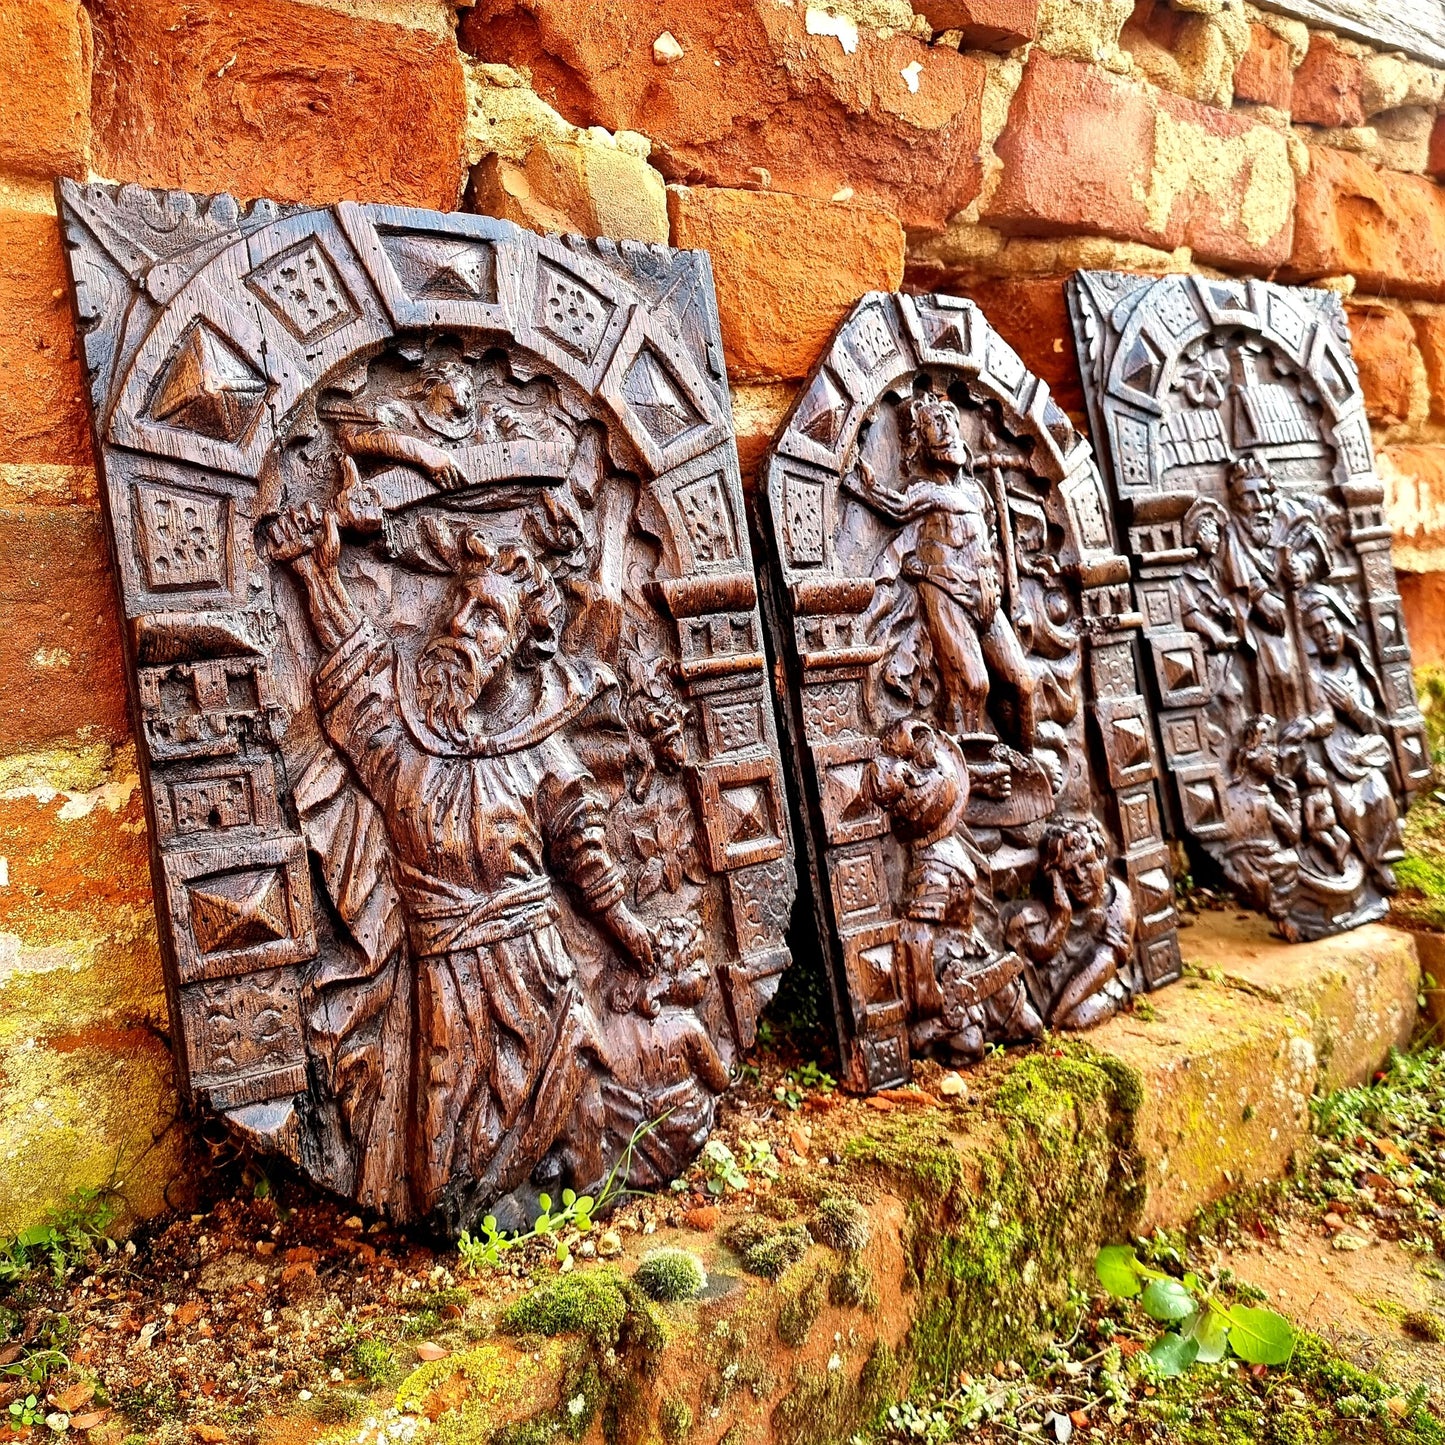 Set of 3 x Early 17th Century Flemish Antique Carved Oak Panels Including The Nativity, The Arrest of Jesus and The Resurrection